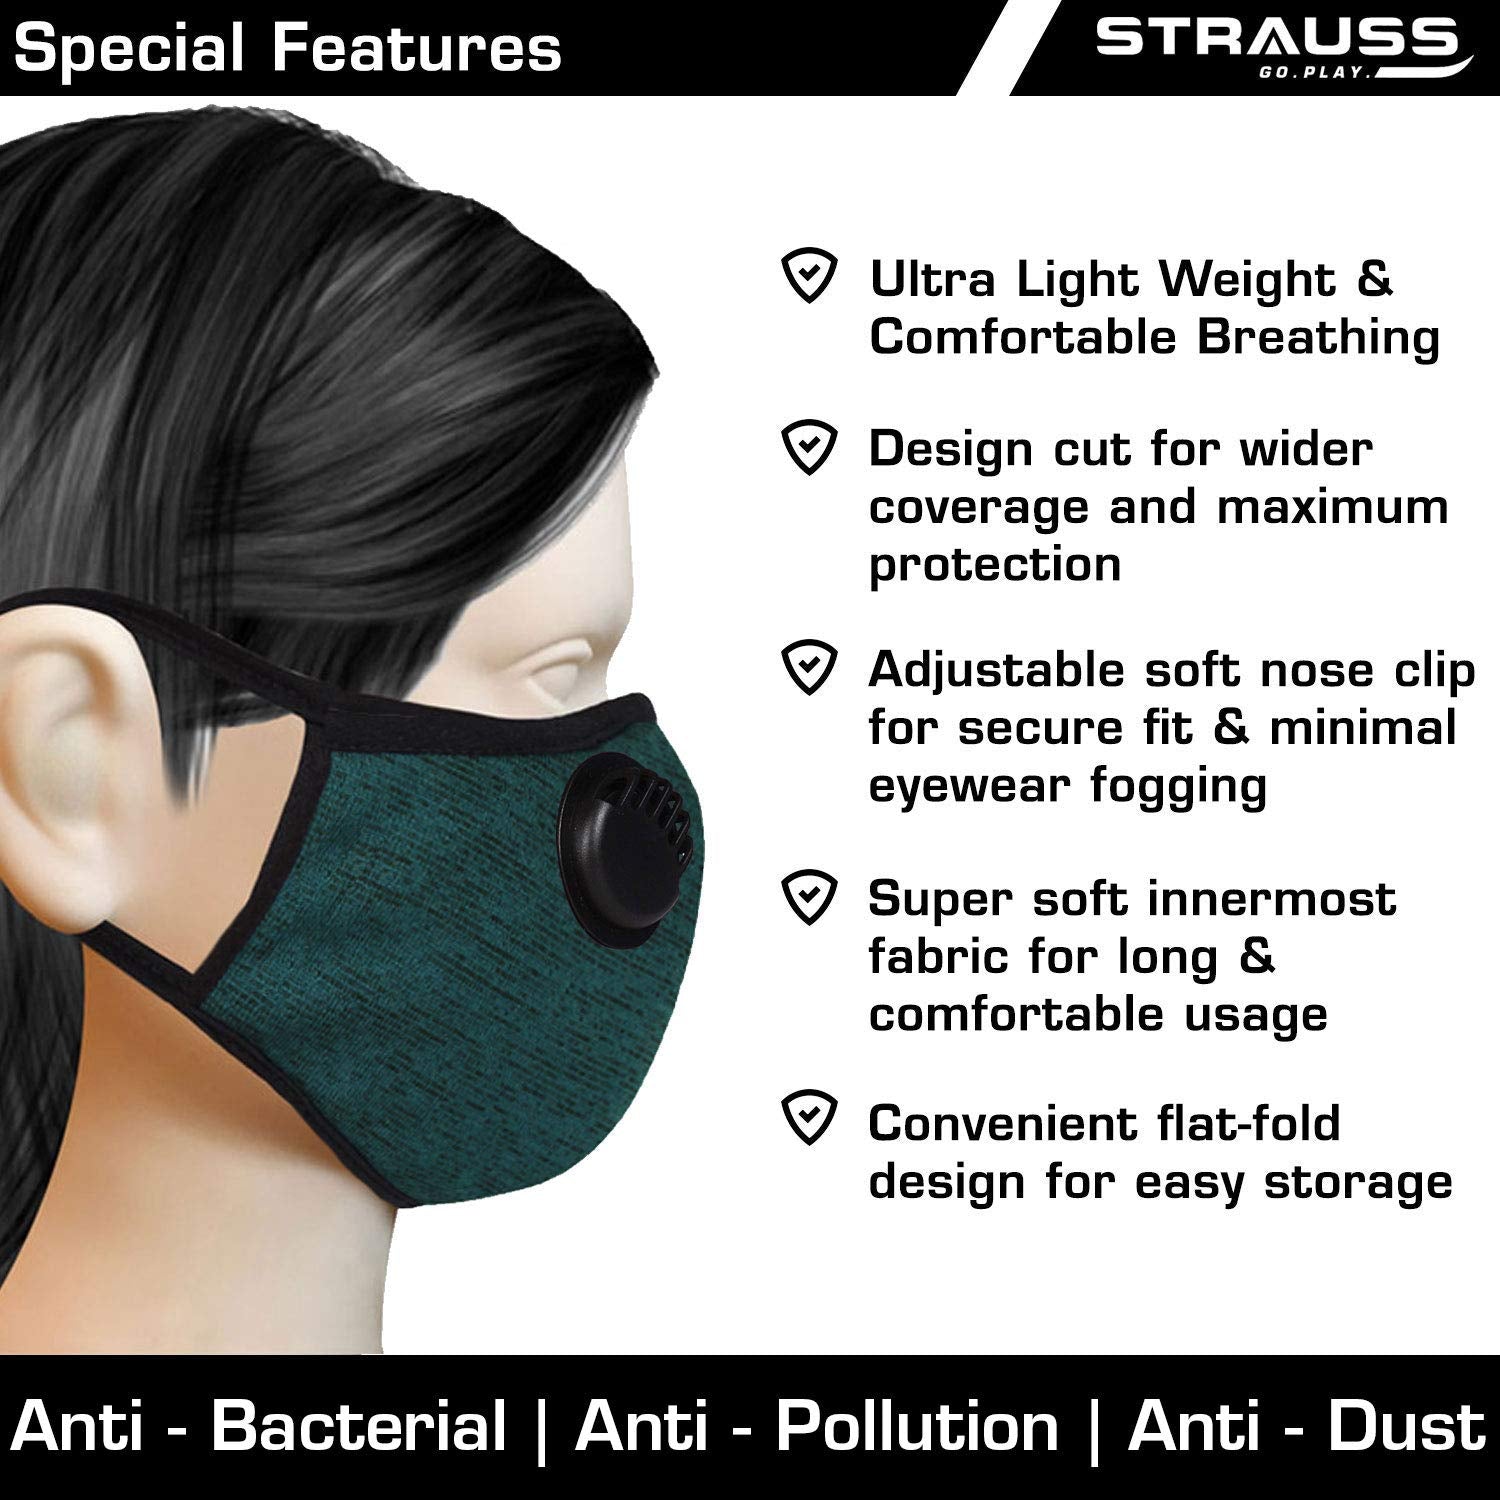 STRAUSS Unisex Anti-Bacterial Protection Mask, Black Vent, Medium, (Red)